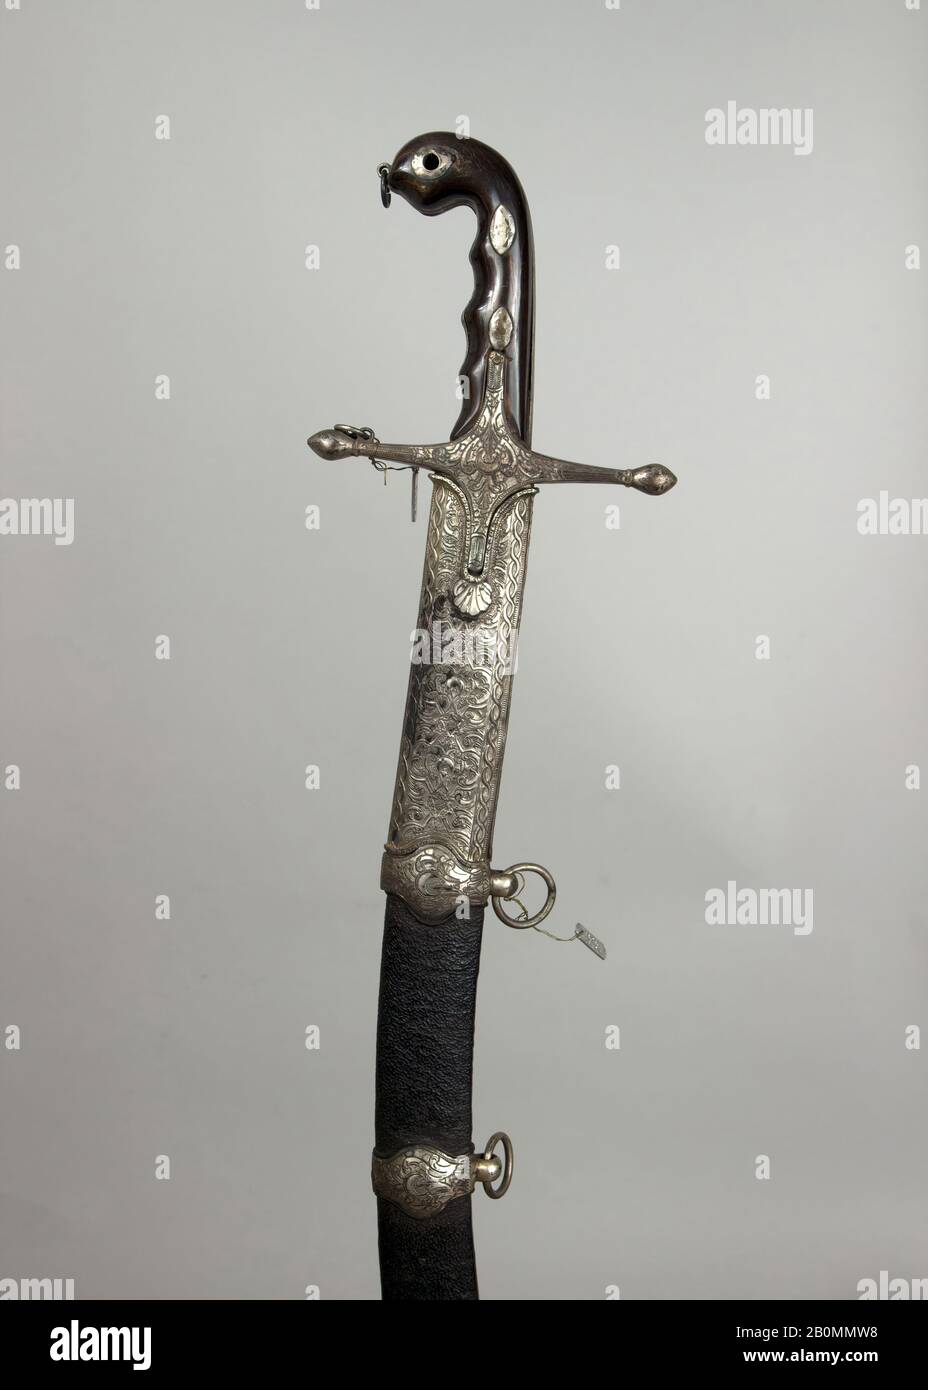 Sword (Kilij) with Scabbard, Turkish, 19th century, Turkish, Steel, horn, silver, H. with scabbard 35 1/4 in. (89.5 cm); H. without scabbard 33 in. (83.8 cm); W. 6 in. (15.2 cm); Wt. 1 lb. 6.5 oz. (637.9 g); Wt. of scabbard 1 lb. 4.3 oz. (575.5 g), Swords Stock Photo